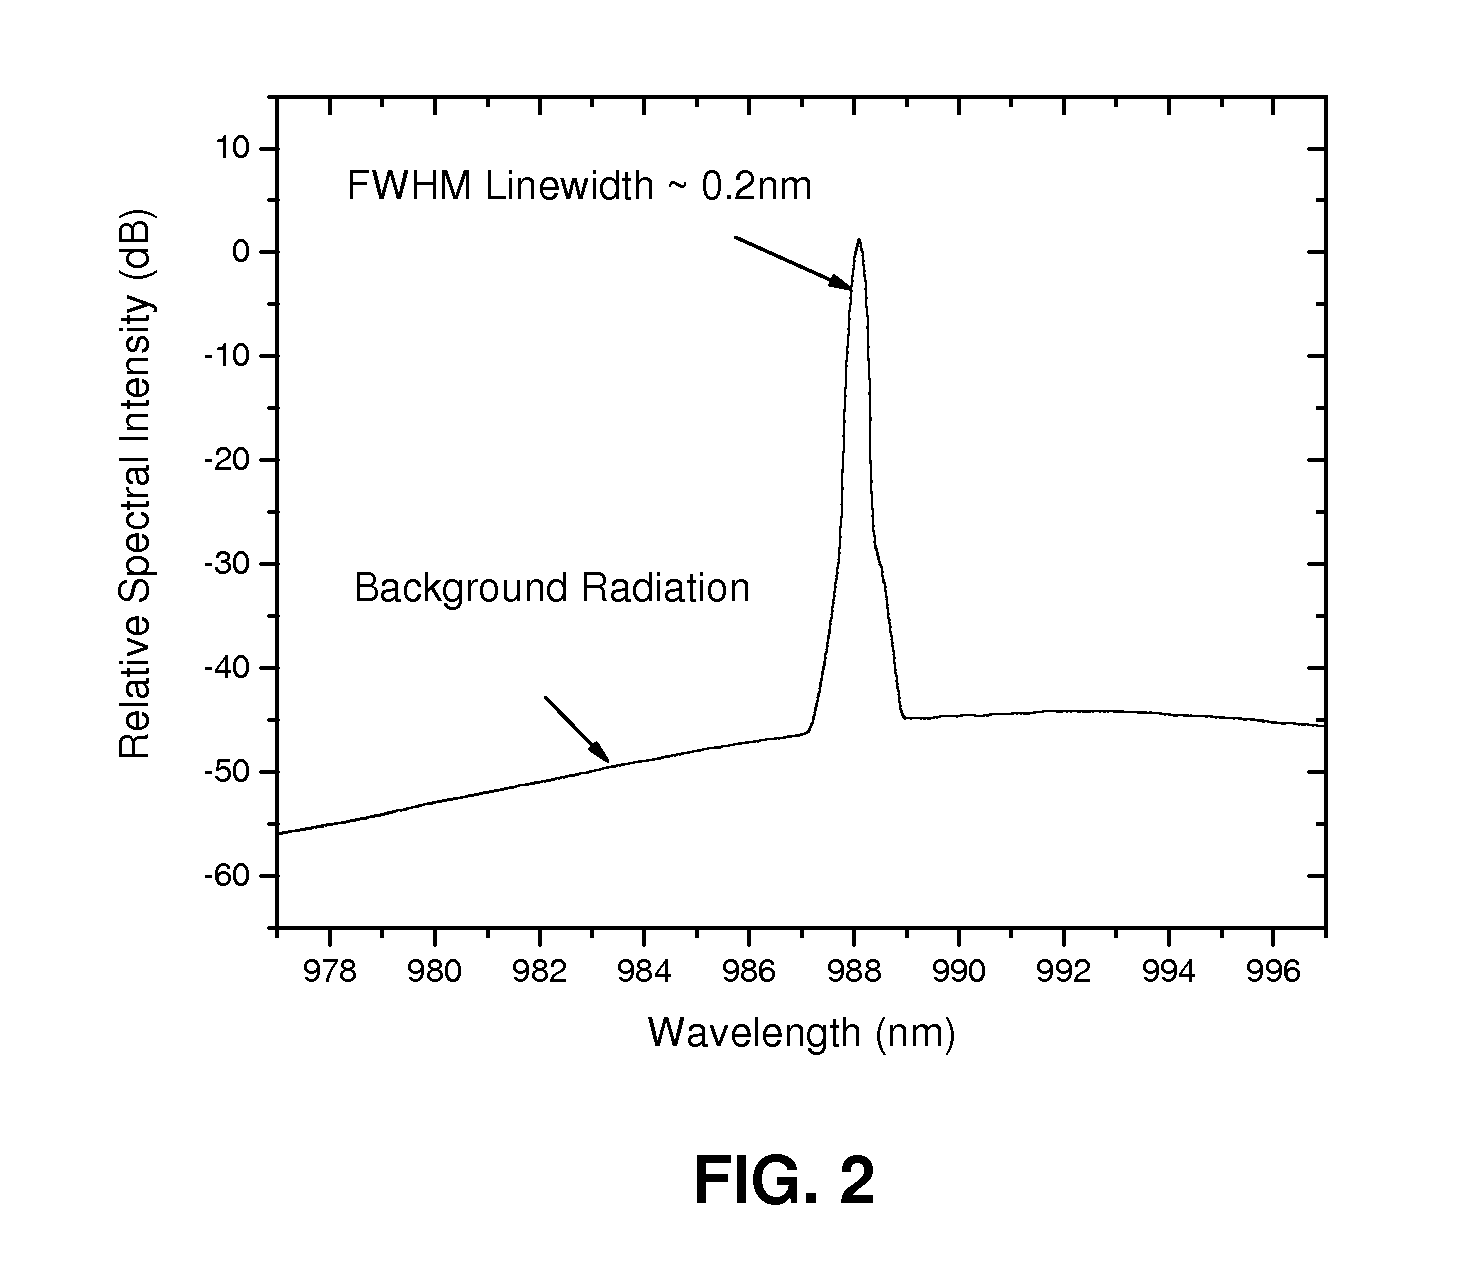 Raman spectroscopic apparatus utilizing internal grating stabilized semiconductor laser with high spectral brightness